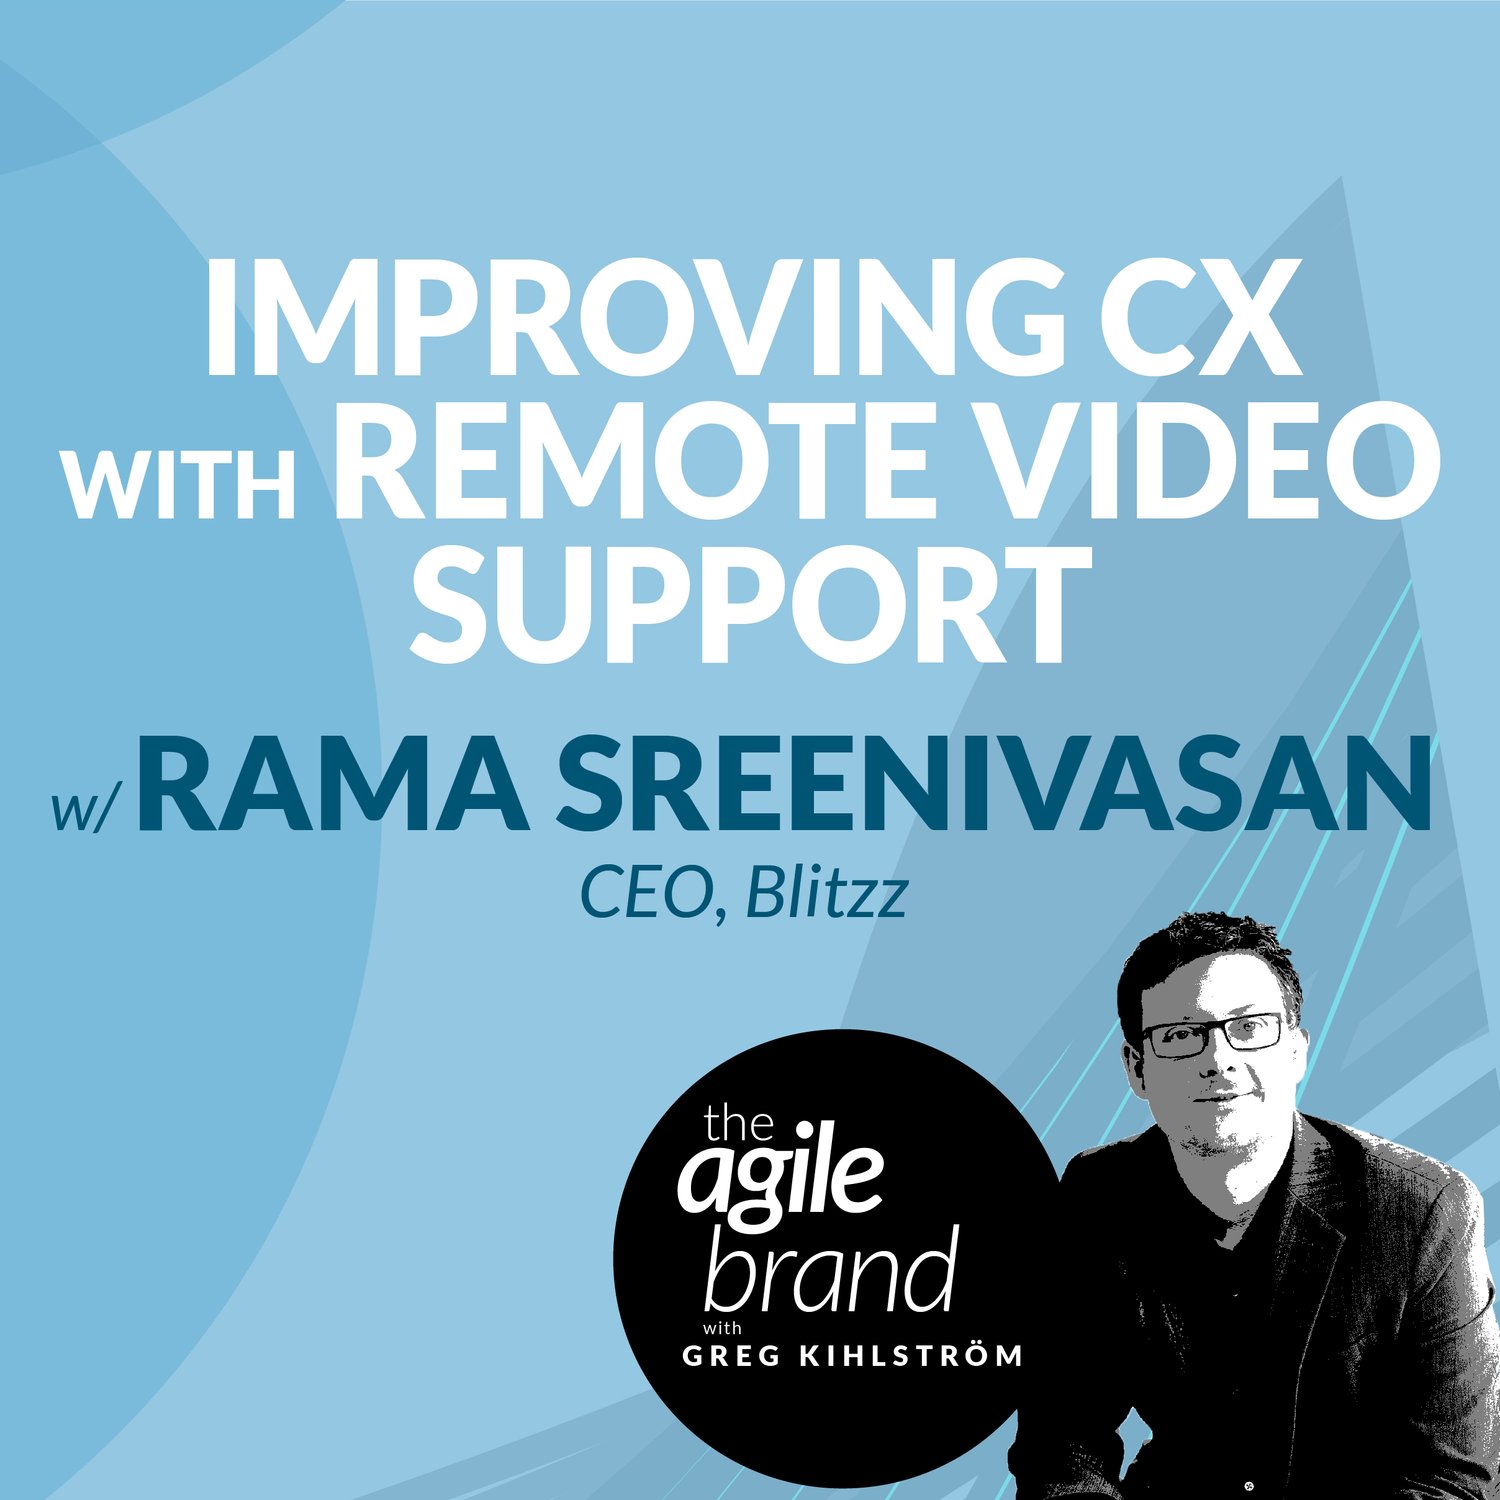 S5  341: Improving CX with Remote Video Support, with Rama Sreenivasan, CEO of Blitzz